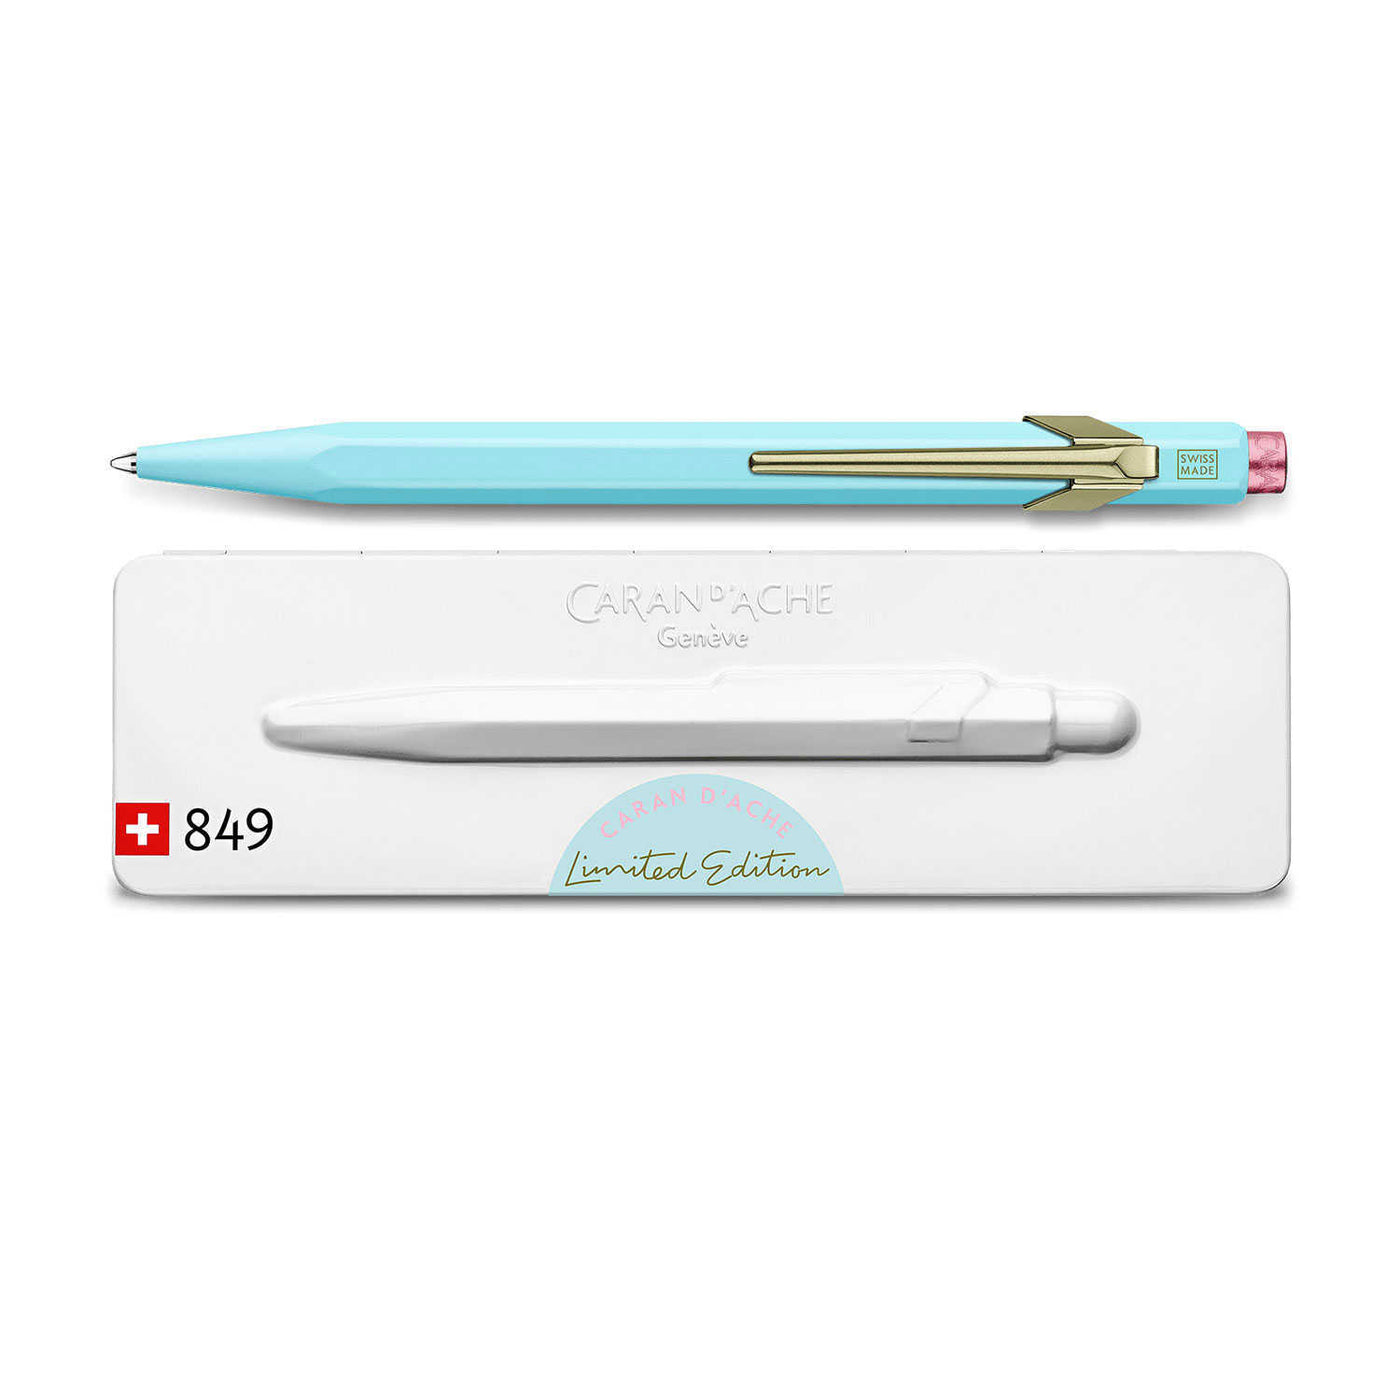 Caran d'Ache 849 Claim Your Style Ball Pen - Bluish Pale (Limited Edition) 2